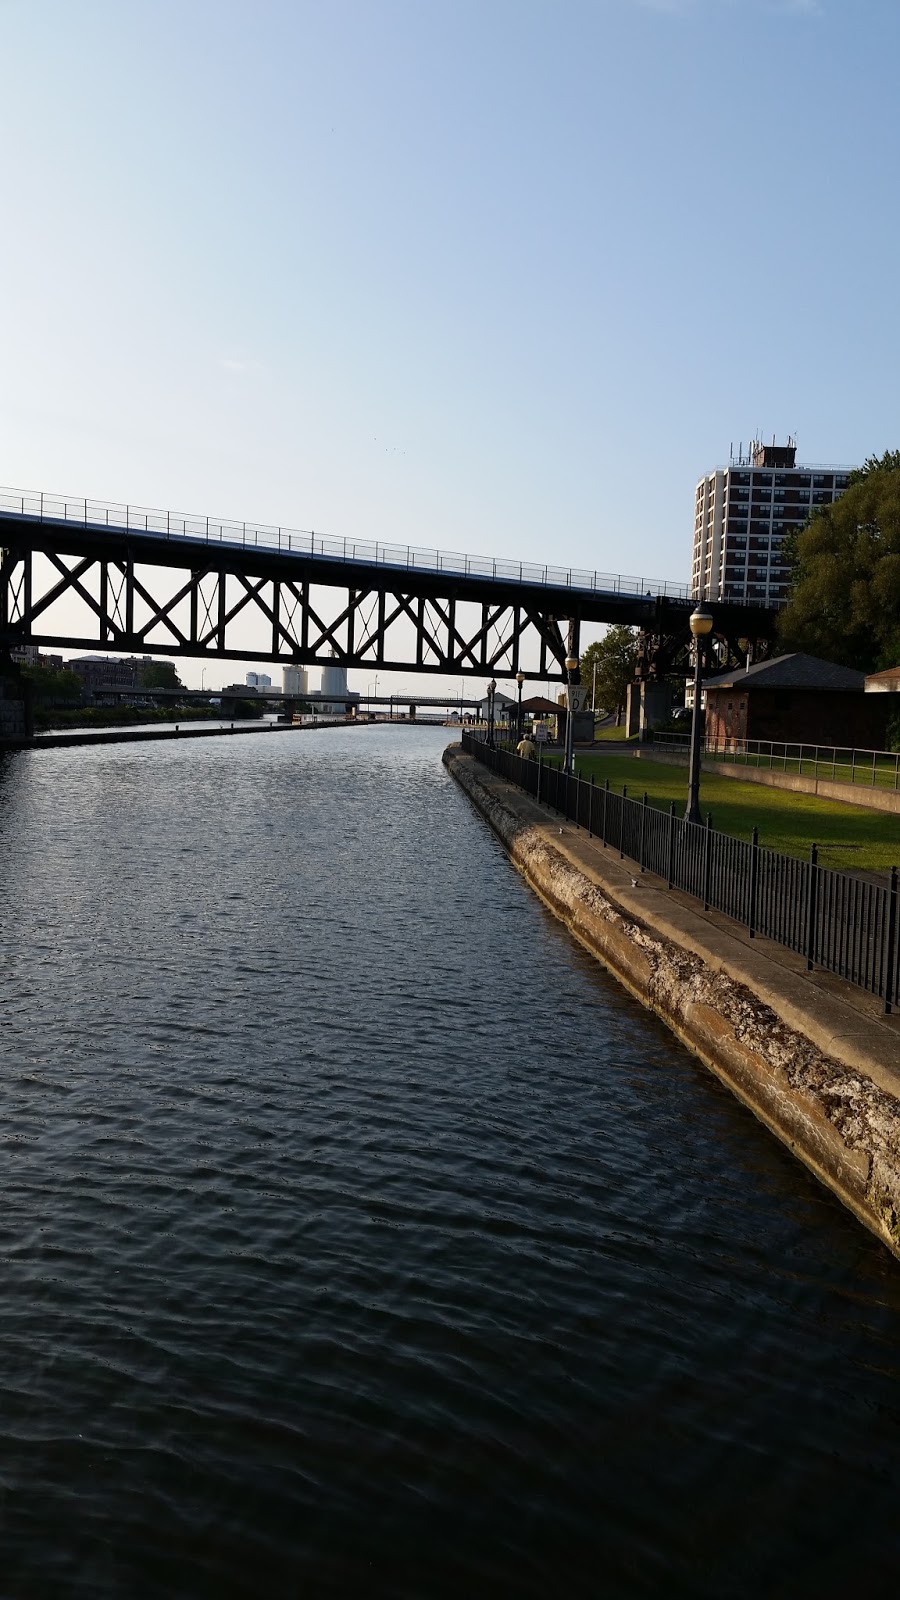 Utica NY on the Erie Canal to the Oswego Canal to Lake Ontario, with